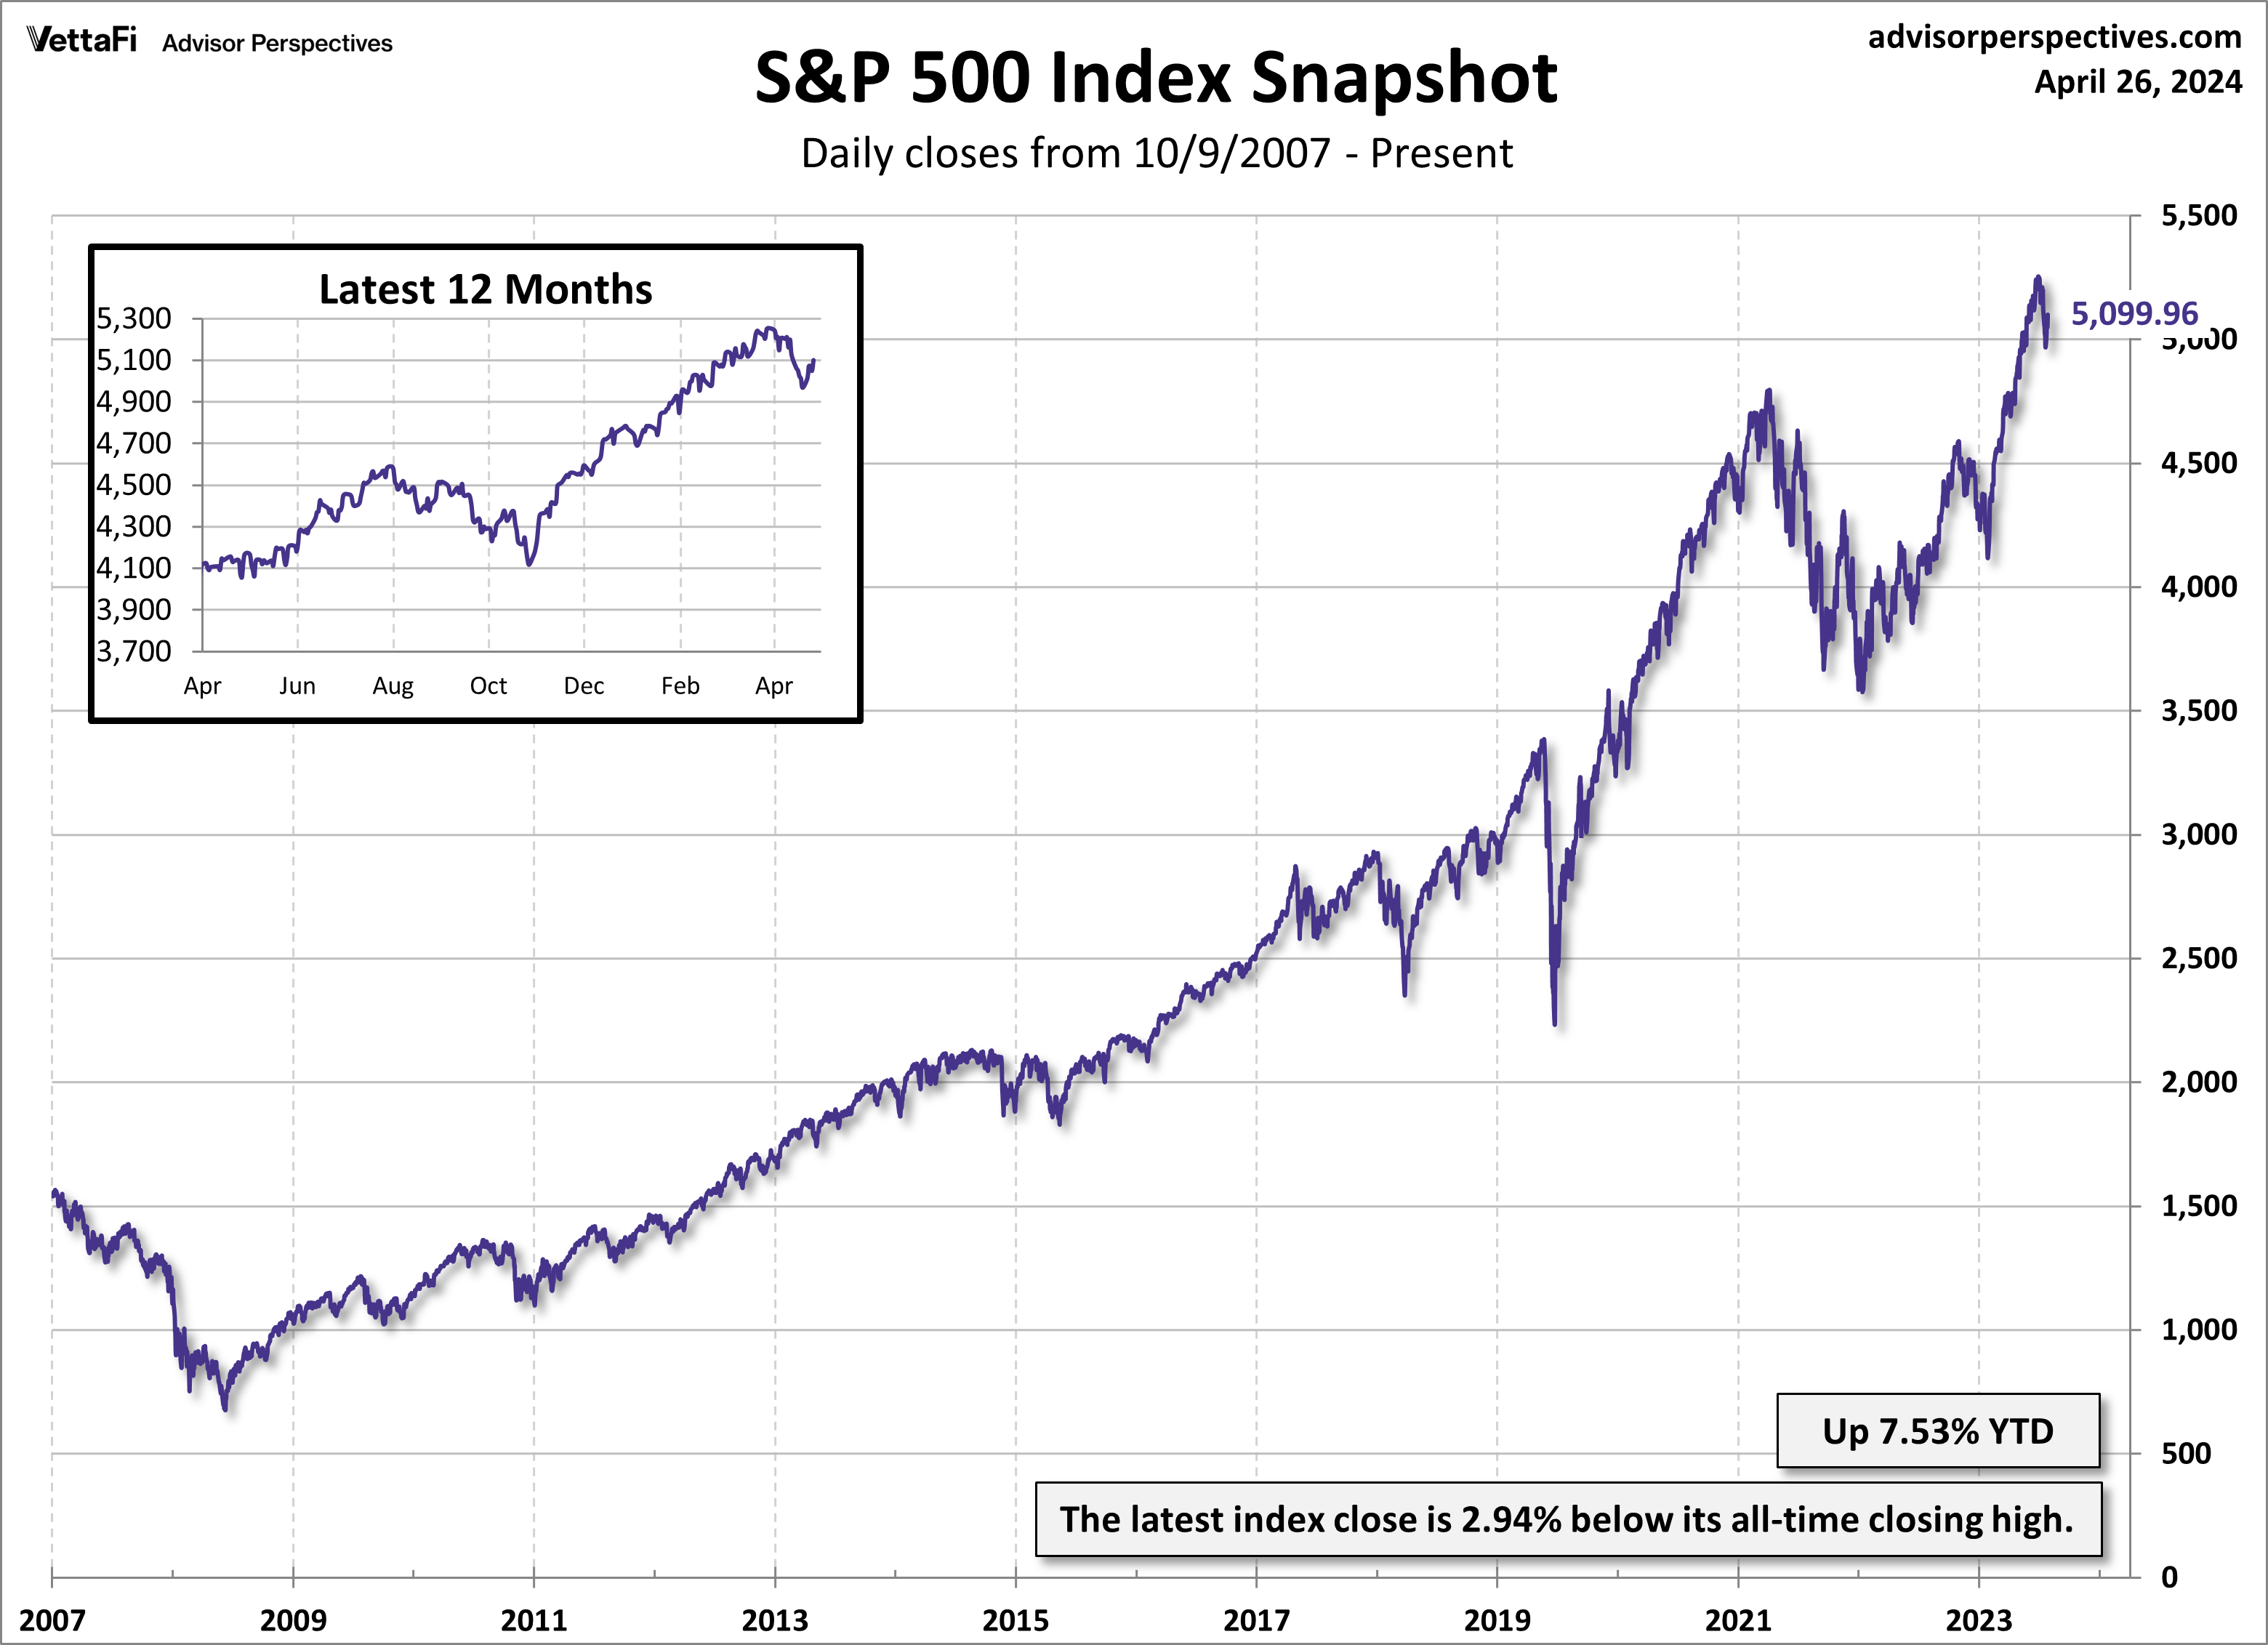 SPX Snapshot Daily closes from Oct. 9, 2007 - Present